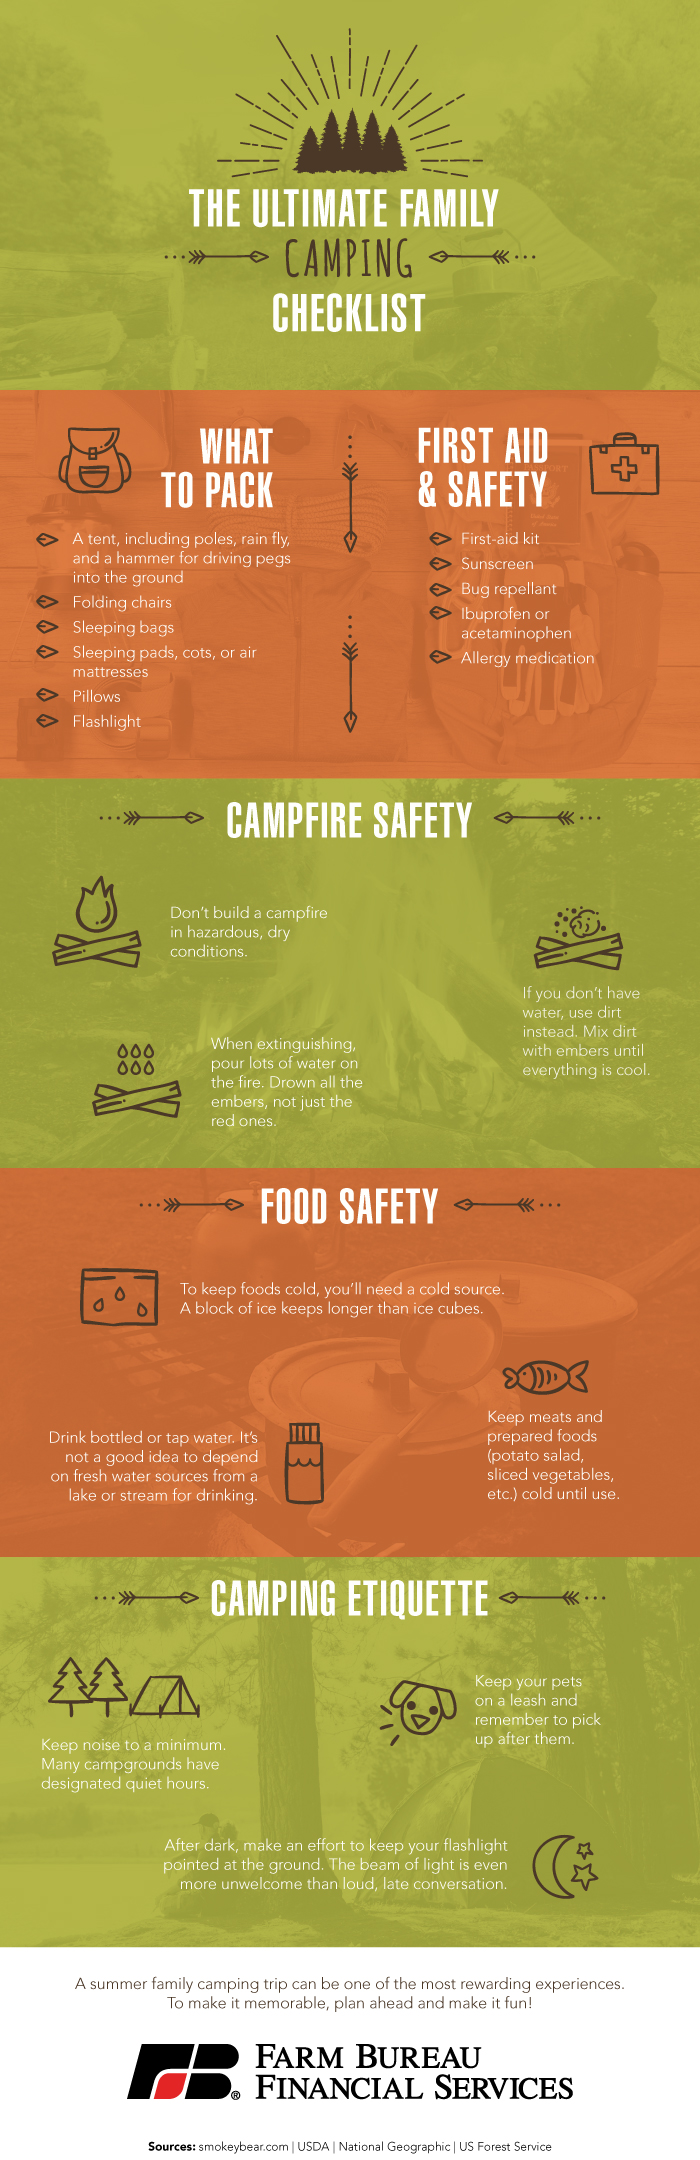 Ultimate Family Camping Checklist